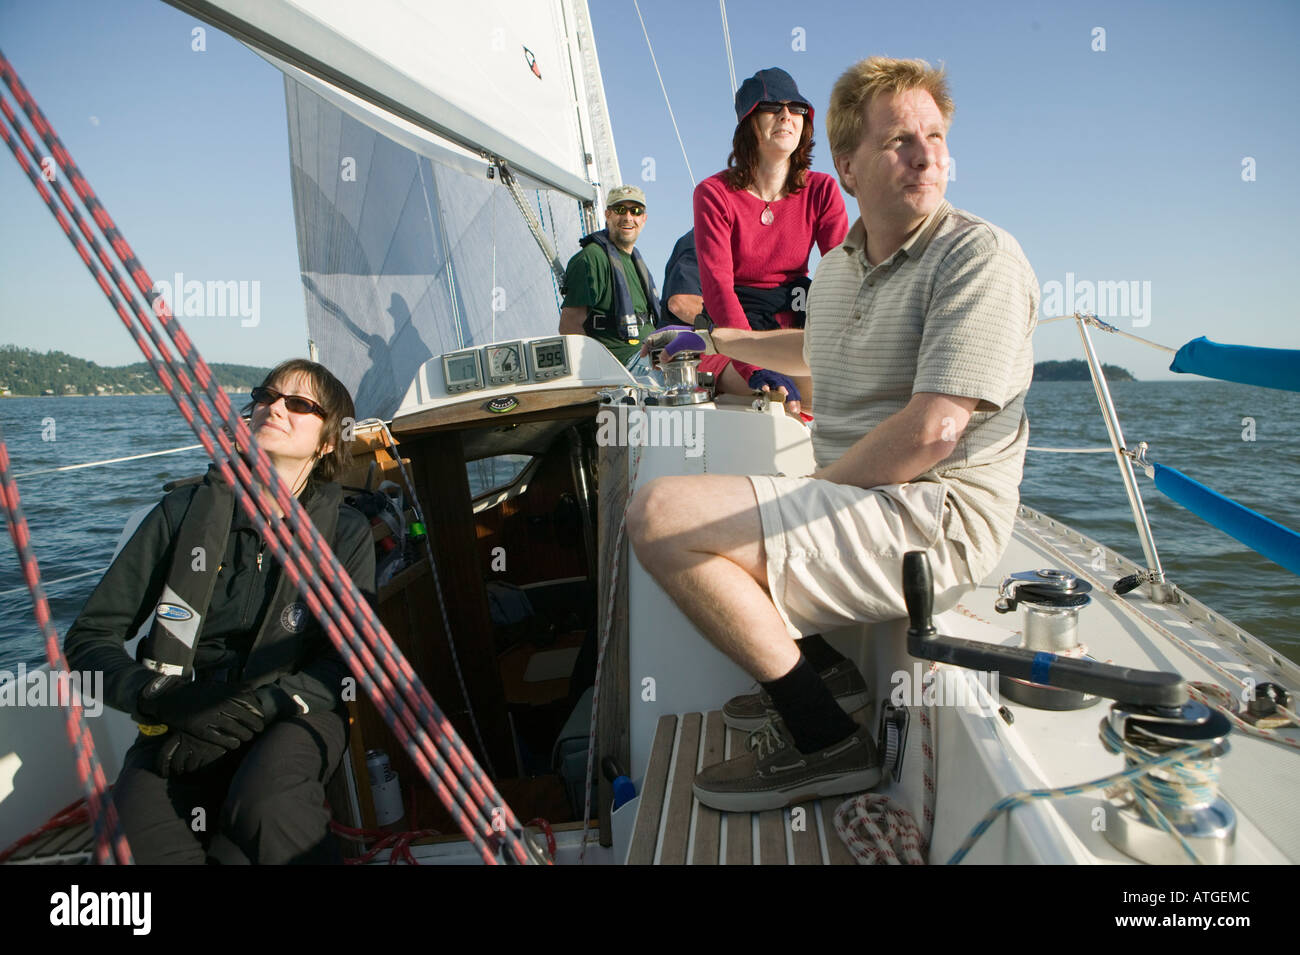 Group of Friends Out Sailing Stock Photo